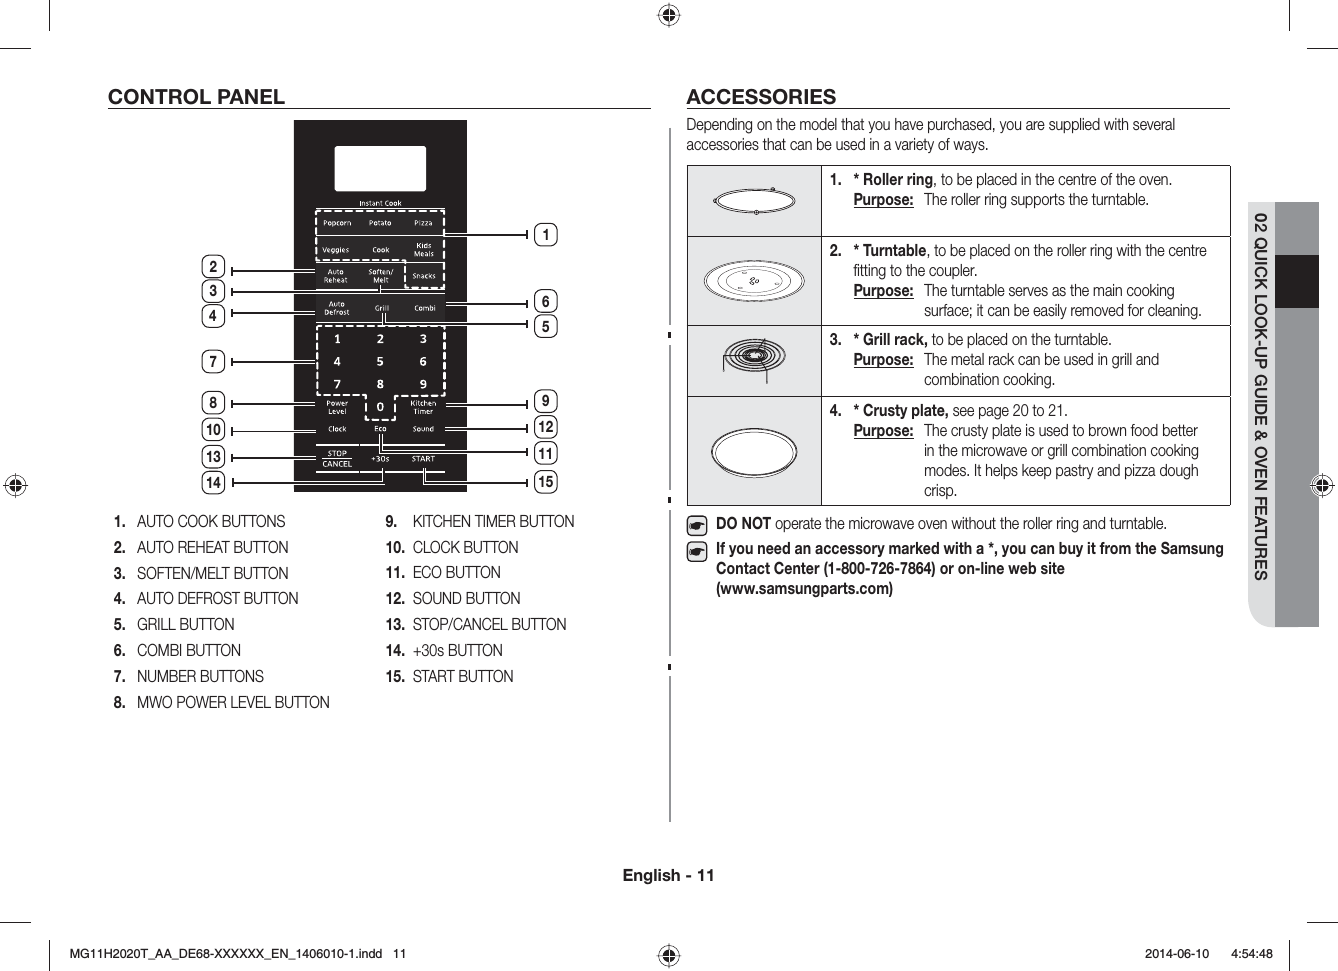 English - 1102 QUICK LOOK-UP GUIDE &amp; OVEN FEATURESCONTROL PANEL1.  AUTO COOK BUTTONS2.  AUTO REHEAT BUTTON3.  SOFTEN/MELT BUTTON4.  AUTO DEFROST BUTTON5.  GRILL BUTTON6.  COMBI BUTTON7.  NUMBER BUTTONS8.  MWO POWER LEVEL BUTTON9.   KITCHEN TIMER BUTTON10.   CLOCK BUTTON11.   ECO BUTTON12.   SOUND BUTTON13.   STOP/CANCEL BUTTON14.   +30s BUTTON15.   START BUTTONACCESSORIESDepending on the model that you have purchased, you are supplied with several accessories that can be used in a variety of ways.1. * Roller ring, to be placed in the centre of the oven.Purpose:  The roller ring supports the turntable.2. * Turntable, to be placed on the roller ring with the centre ﬁtting to the coupler.Purpose:  The turntable serves as the main cooking surface; it can be easily removed for cleaning.3. * Grill rack, to be placed on the turntable.Purpose:  The metal rack can be used in grill and combination cooking.4. * Crusty plate, see page 20 to 21.Purpose:  The crusty plate is used to brown food better in the microwave or grill combination cooking modes. It helps keep pastry and pizza dough crisp.DO NOT operate the microwave oven without the roller ring and turntable.If you need an accessory marked with a *, you can buy it from the Samsung Contact Center (1-800-726-7864) or on-line web site (www.samsungparts.com)916811155710234141312/)*6A##A&amp;&apos;::::::A&apos;0AKPFF  